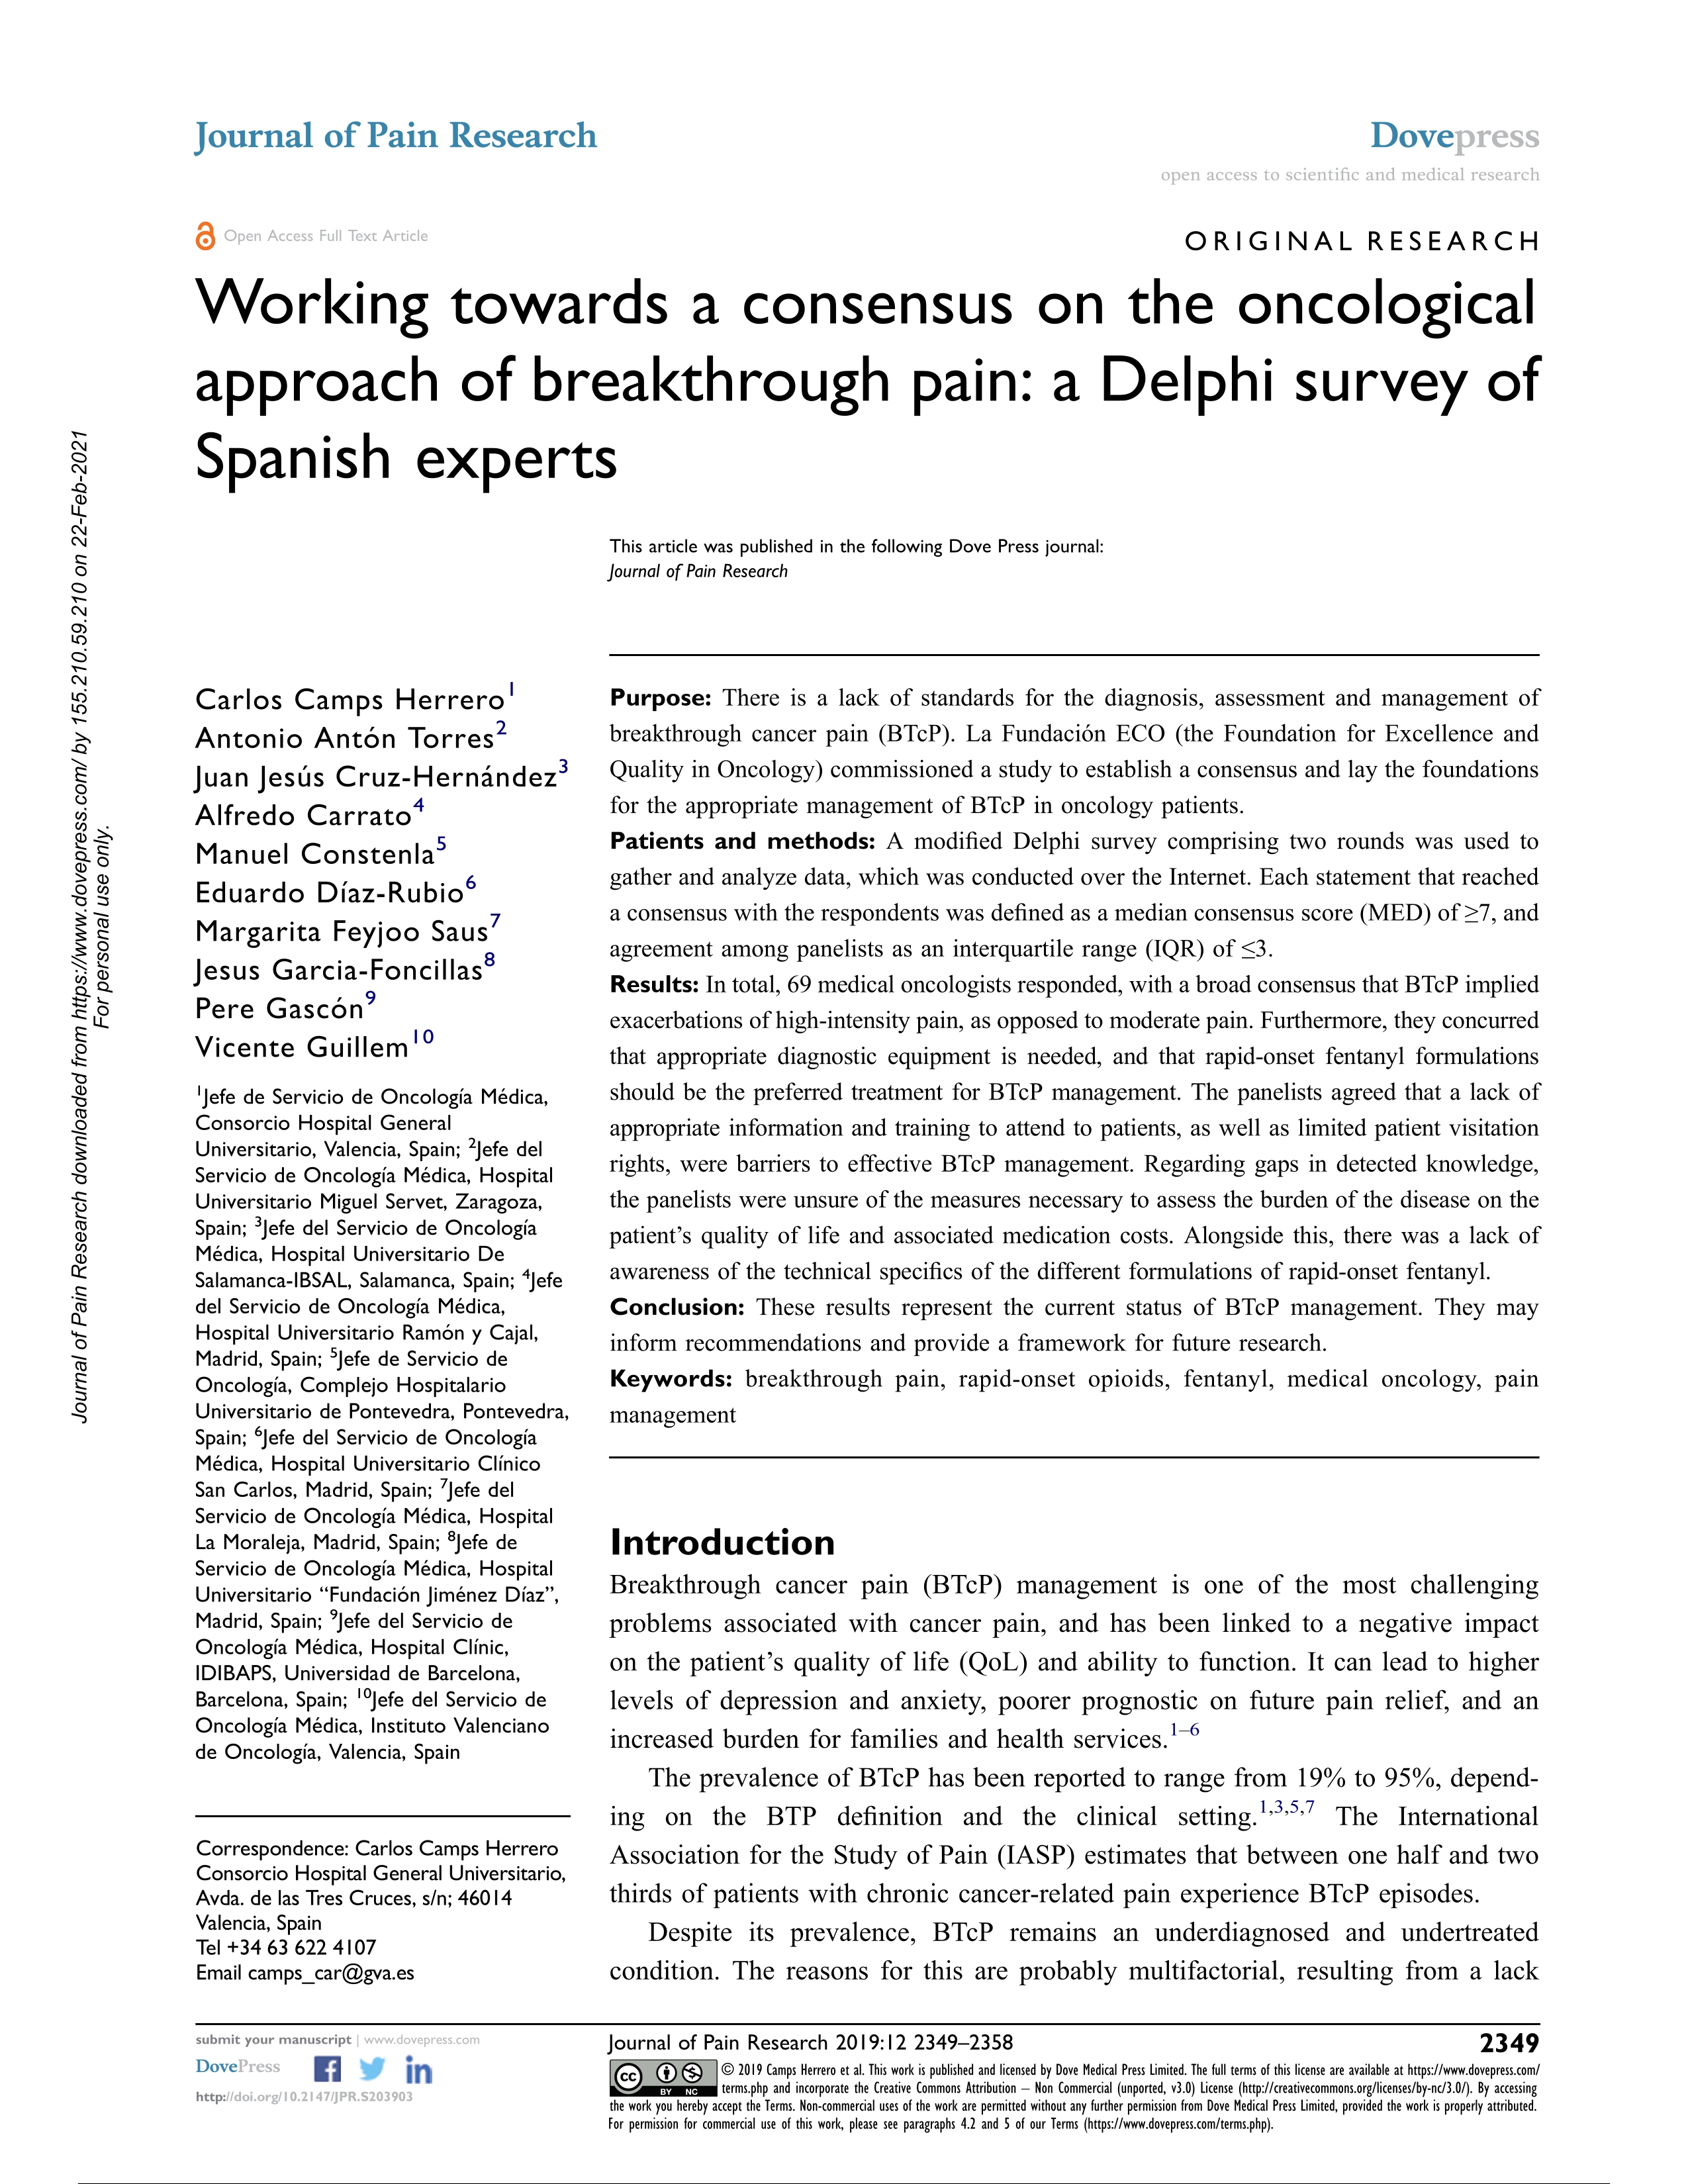 Working towards a consensus on the oncological approach of breakthrough pain: A Delphi survey of Spanish experts